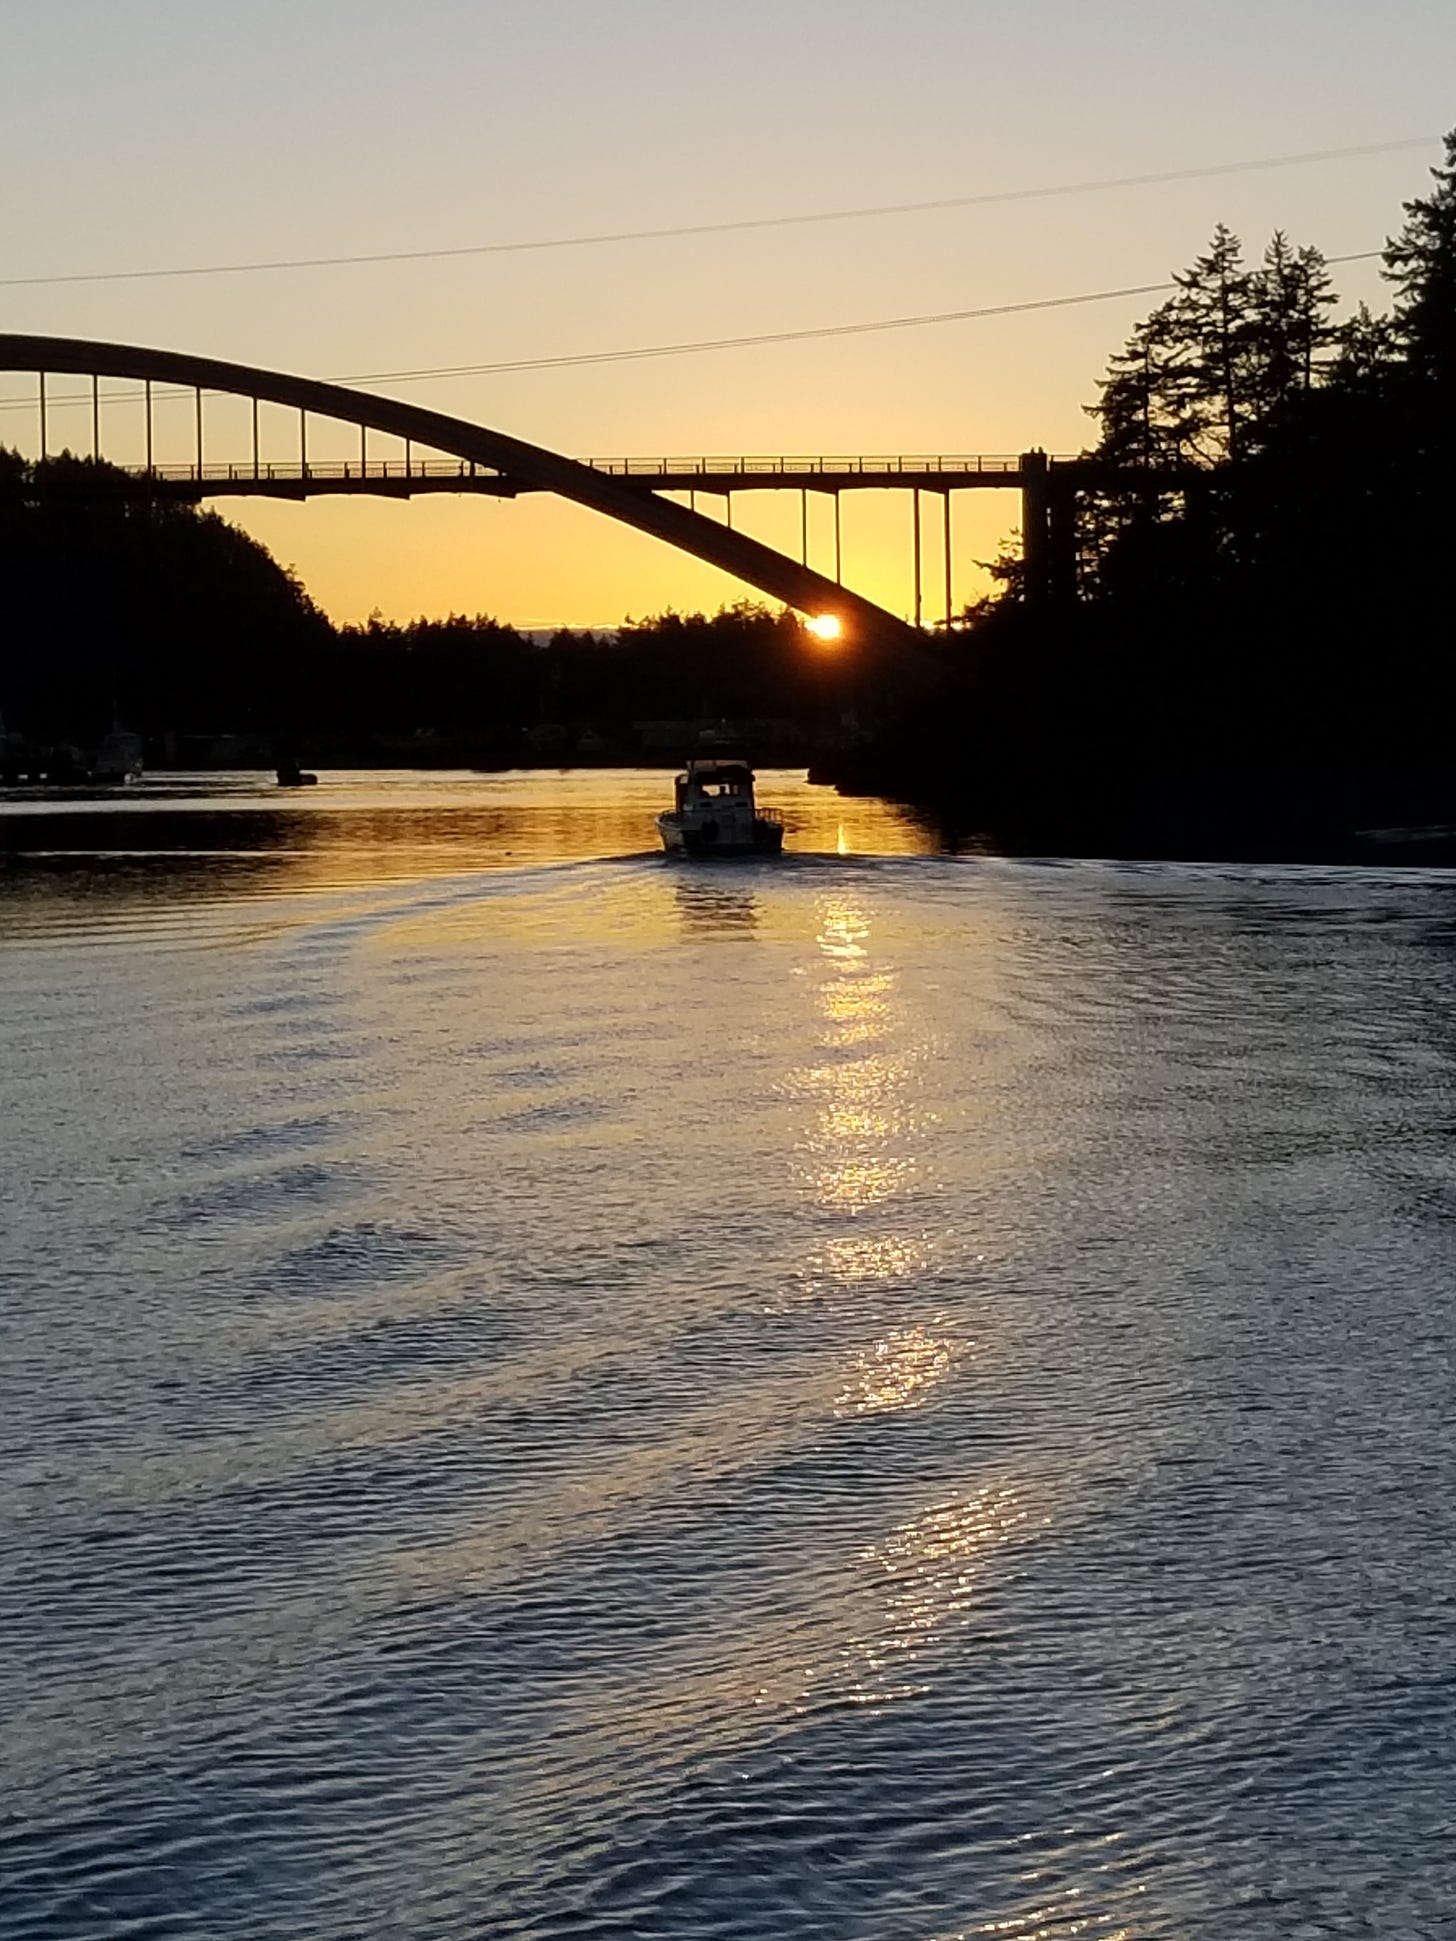 sunset beneath a bridge in shadow, a boat in the channel